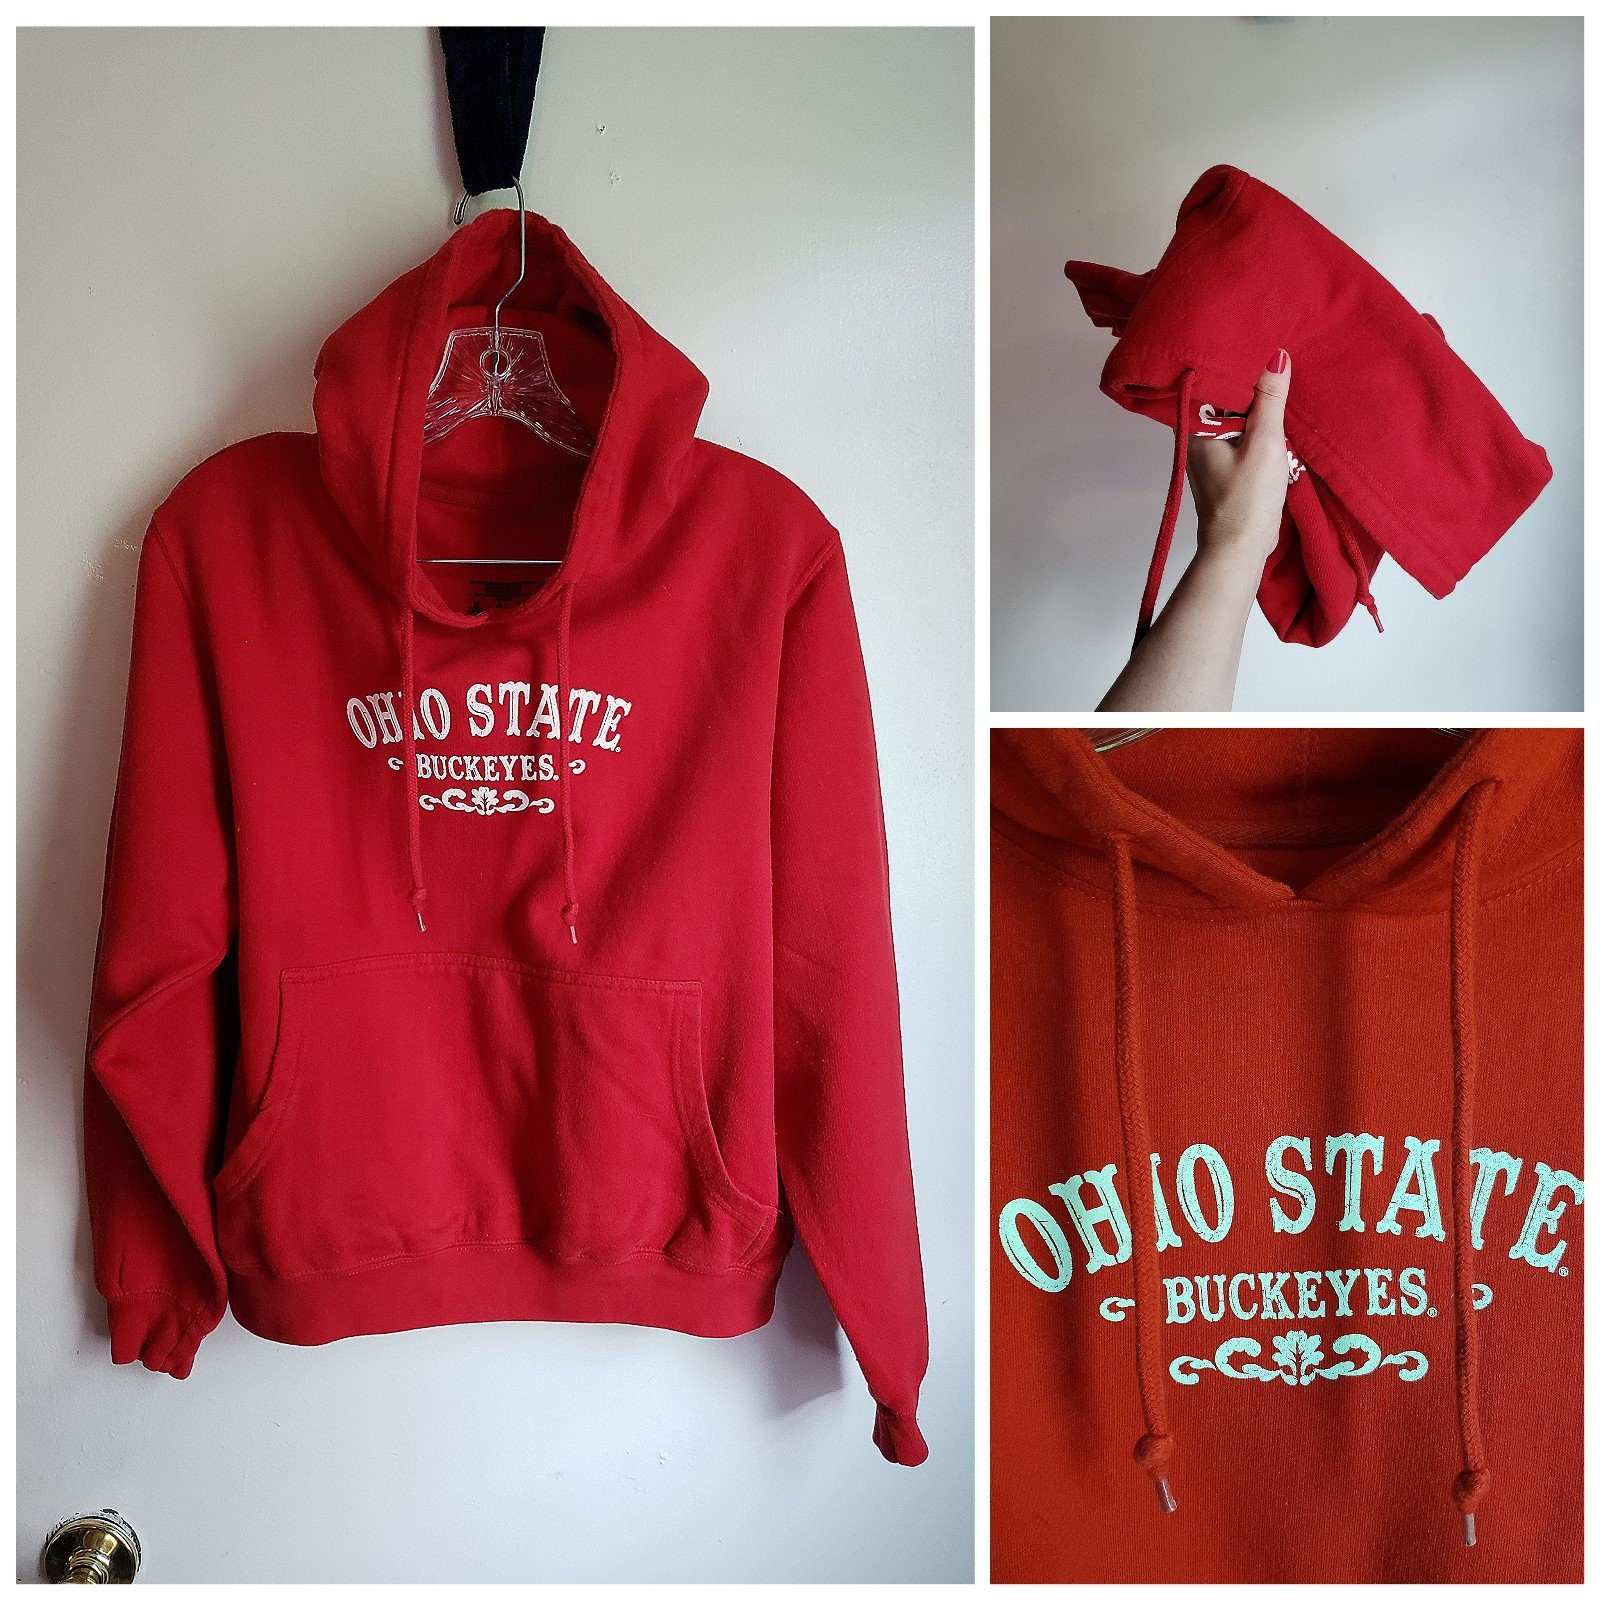 Exclusive Ohio state buckeyes red hoodie oUqDtb0UQ Stor